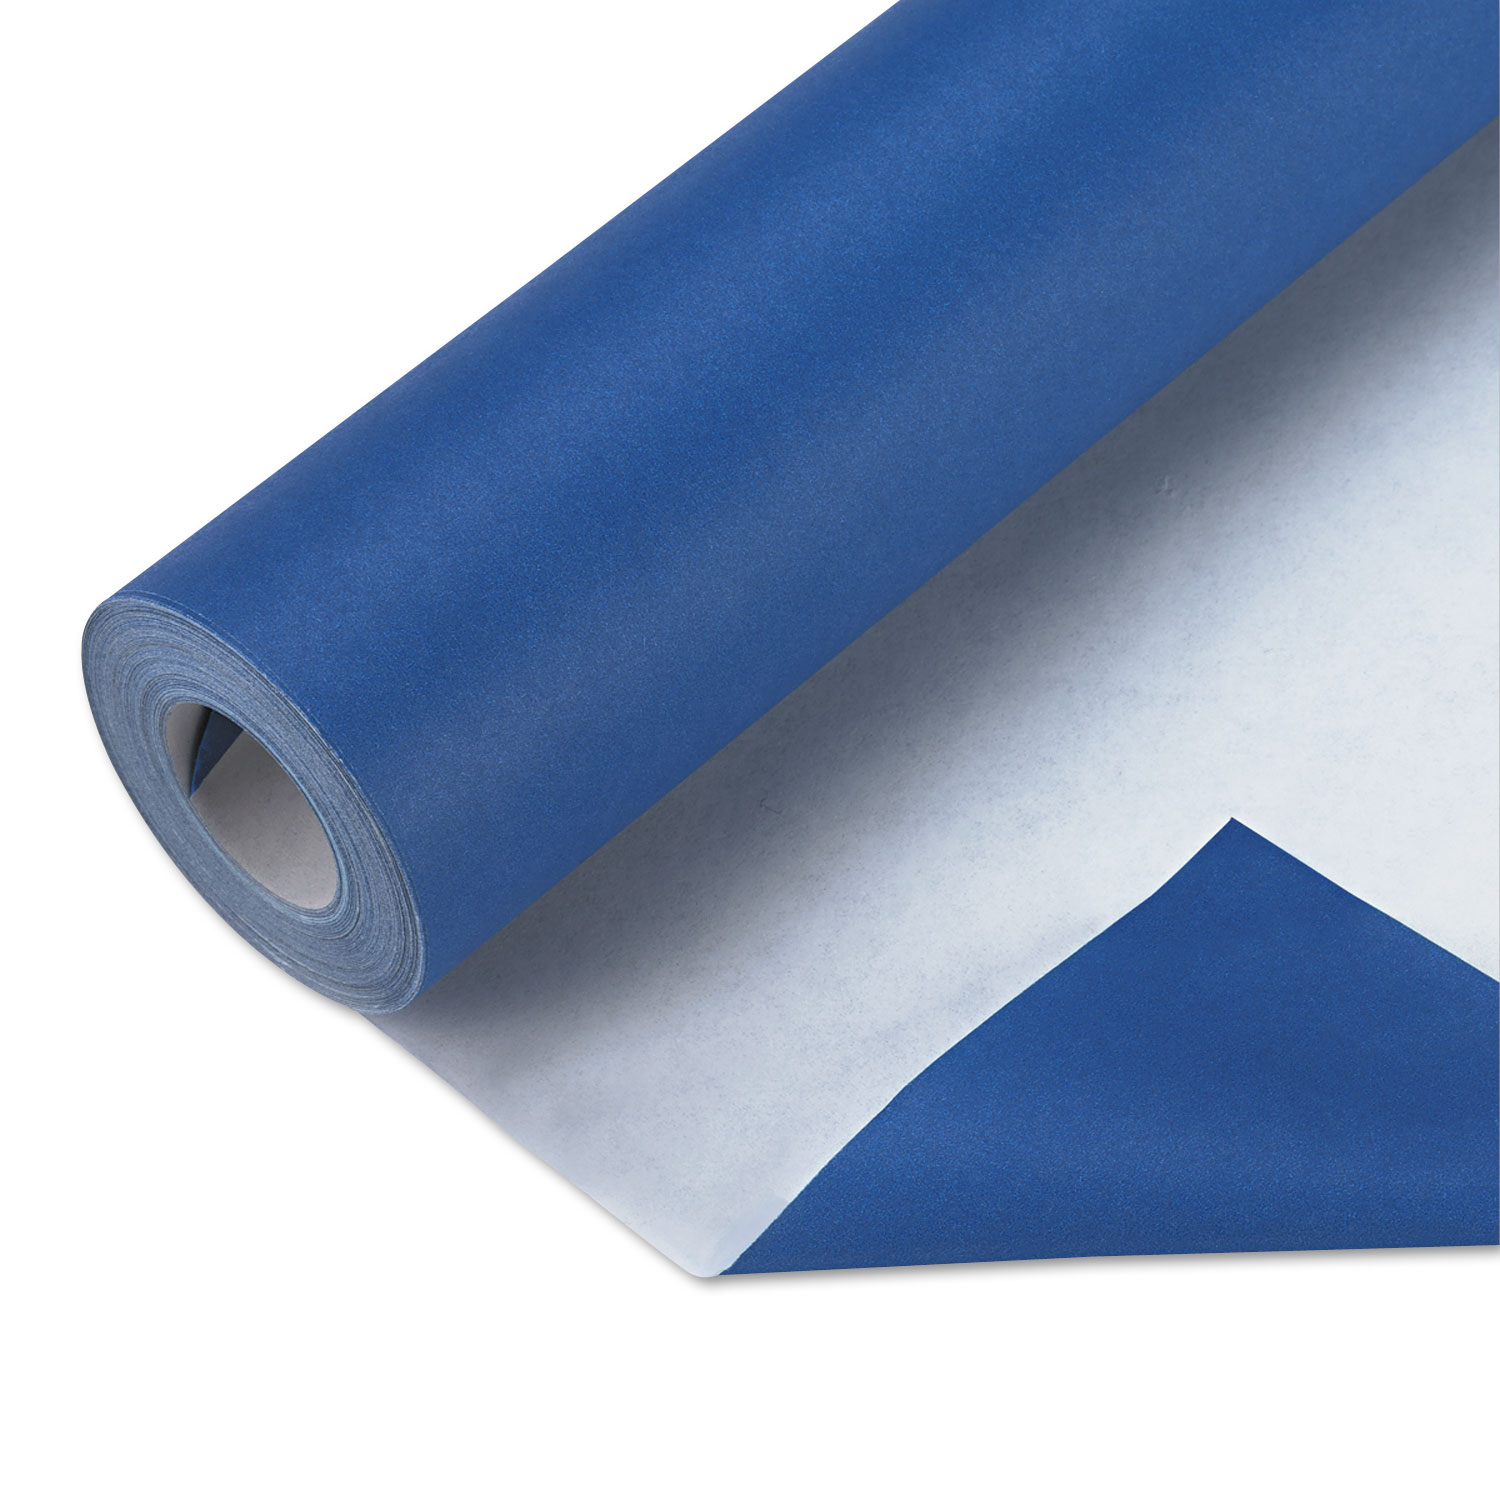  Pacon 57205 Fadeless Paper Roll, 50lb, 48 x 50ft, Royal Blue (PAC57205) 